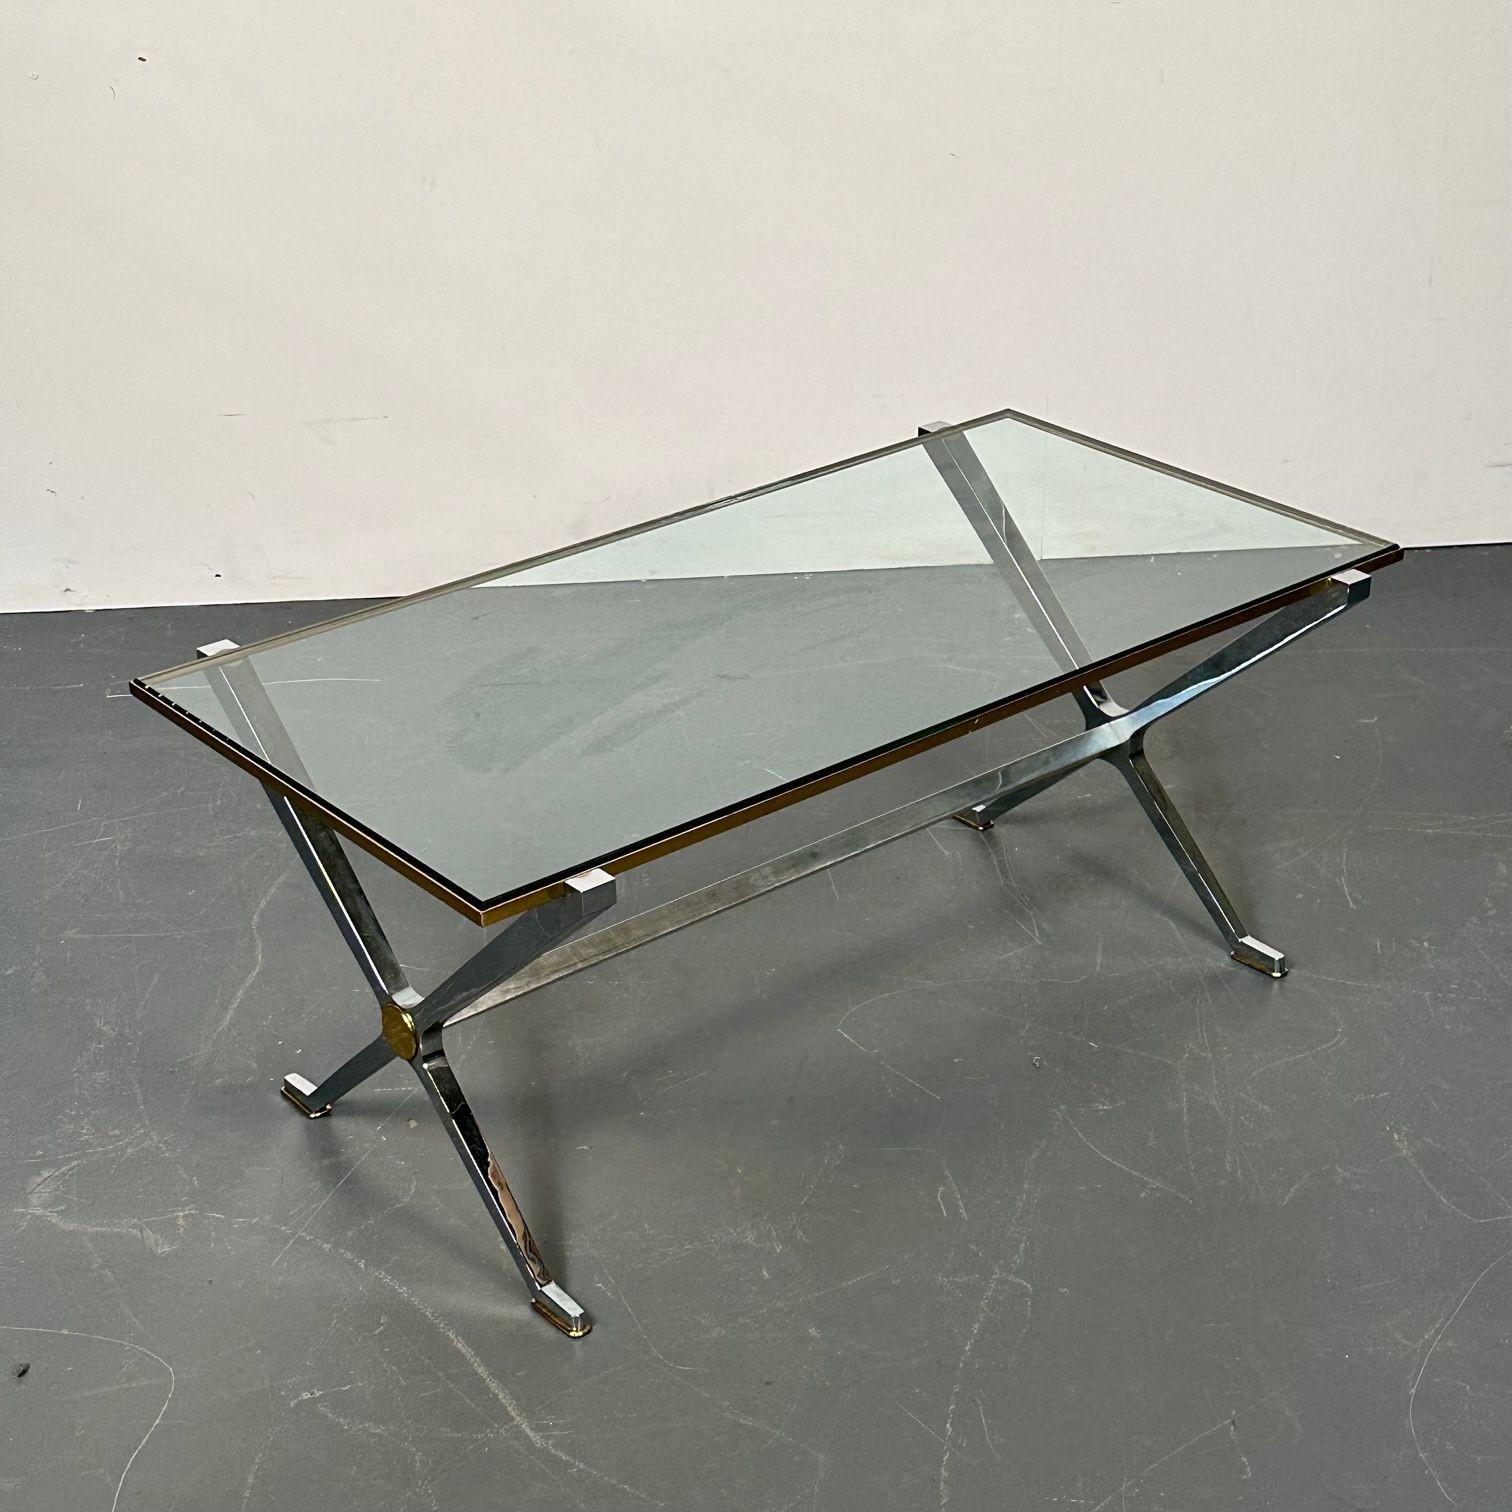 Maison Jansen Style Rectangular coffee table, steel and brass, Hollywood Regency
Hollywood Regency style Maison Jansen coffee or low table having a glass top on a steel and brass frame with a fine decorative undercarriage.
Brass, stainless